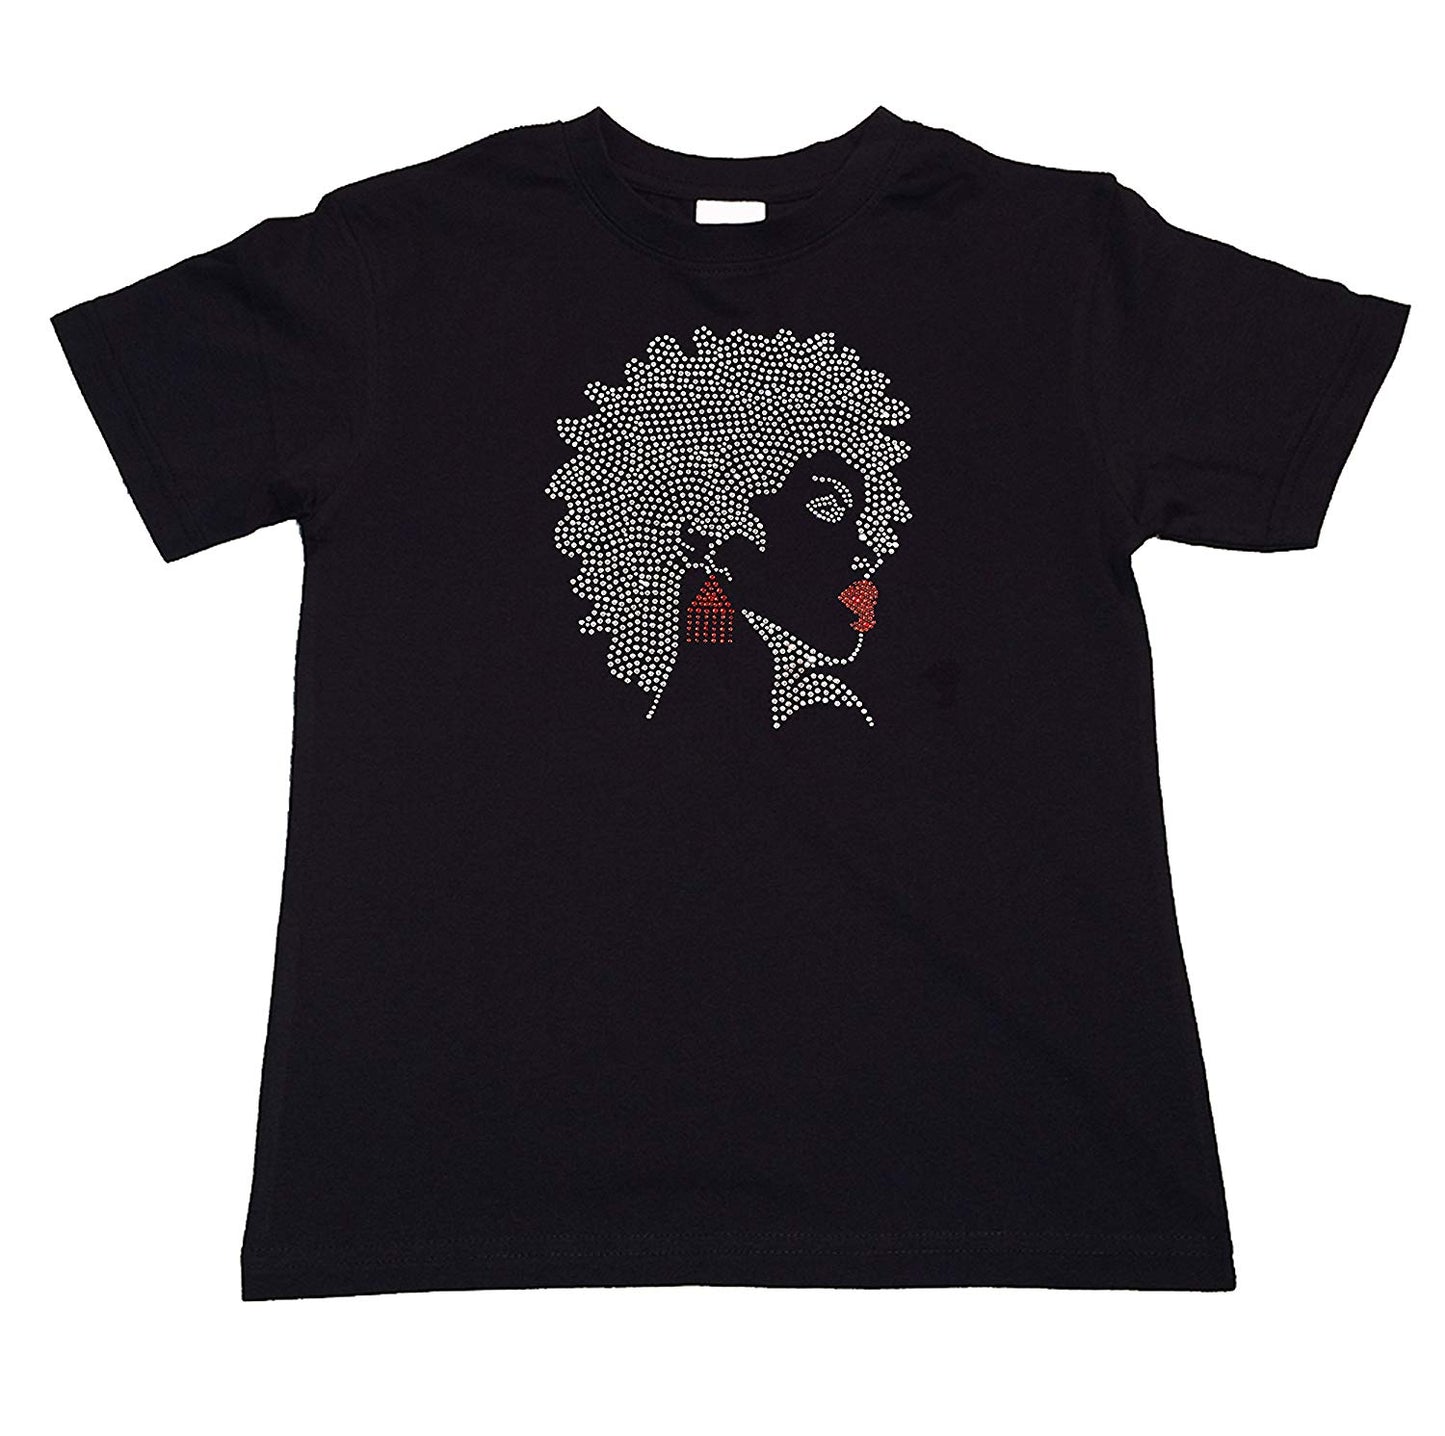 Girls Rhinestone T-Shirt " Afro Girl with Red Earrings and Lipstick in Rhinestones " Kids Size 3 to 14 Available